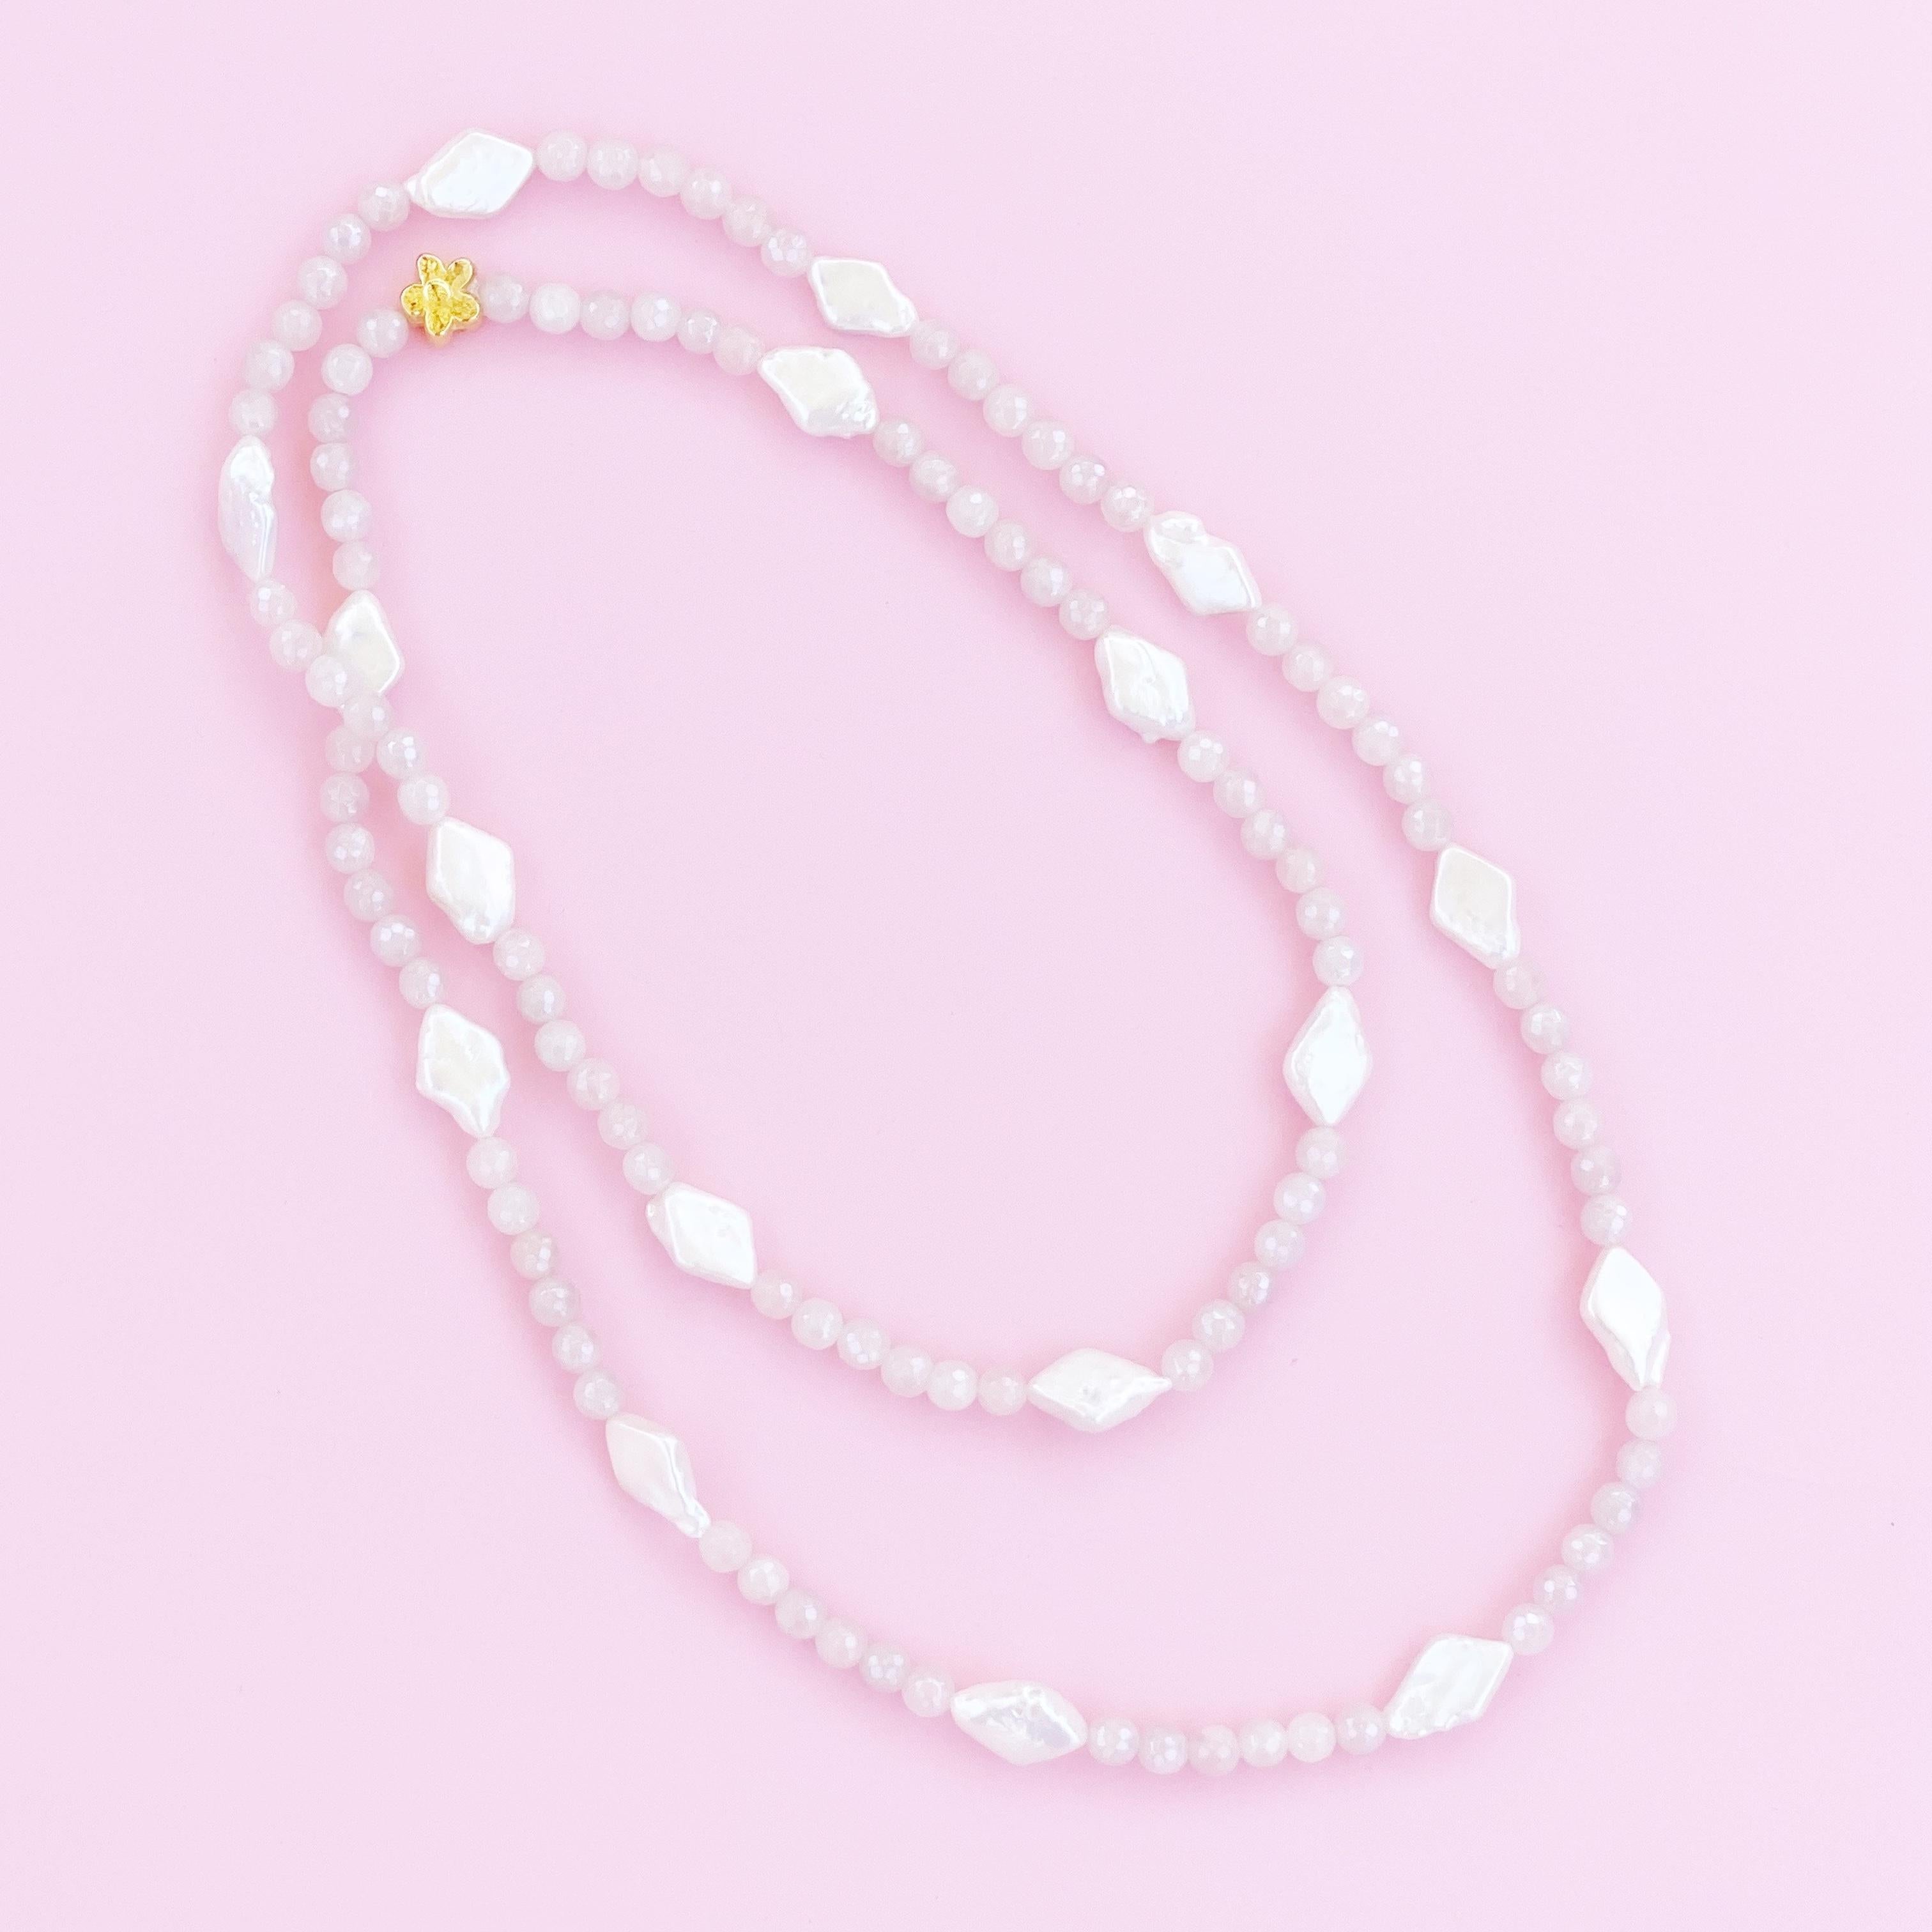 8mm faceted and polished Mystic Pink Aventurine gemstones flanked by diamond shaped baroque pearls.  

44